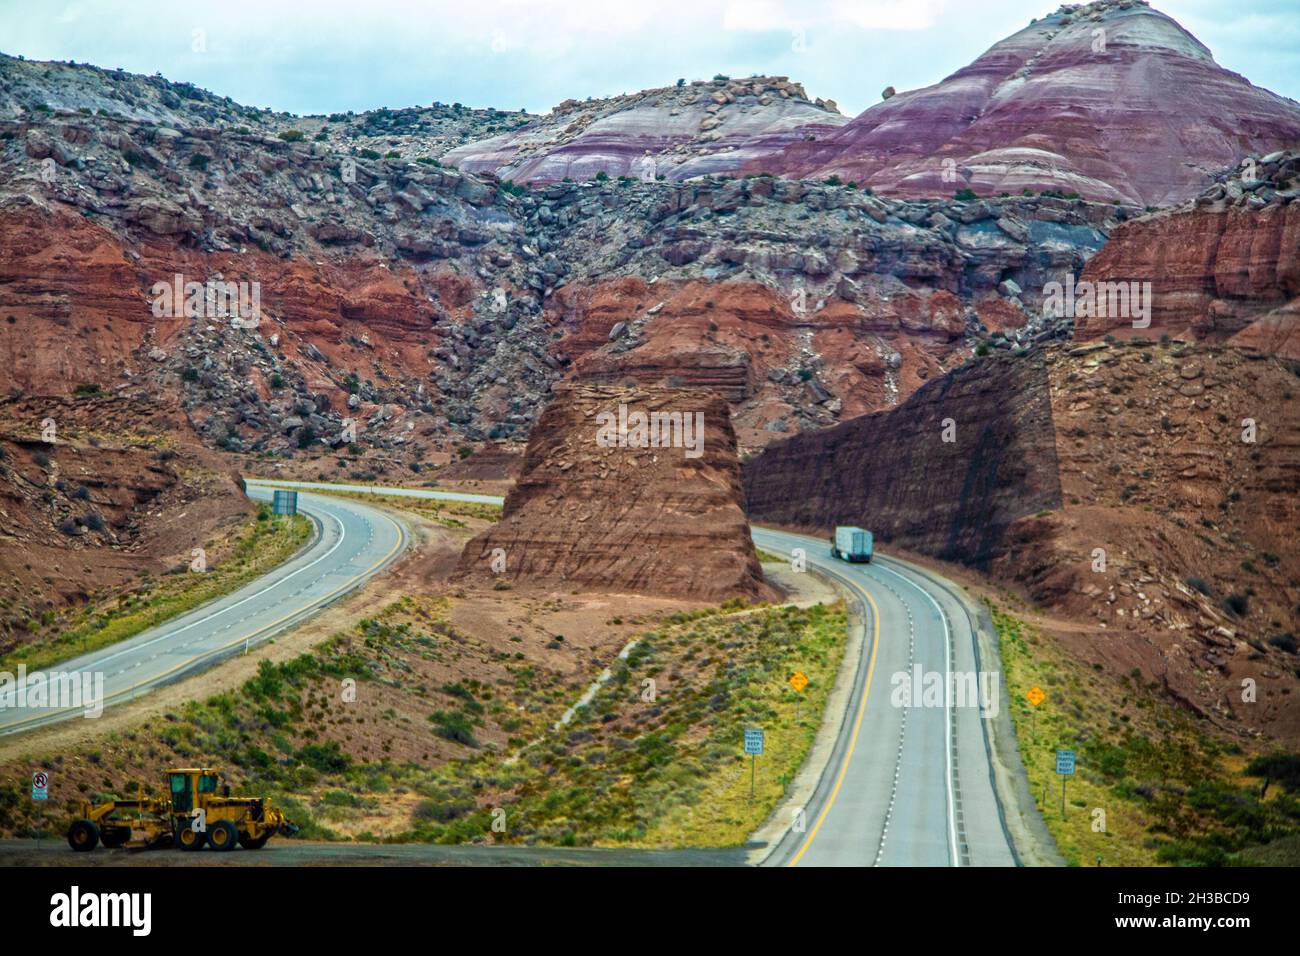 Badlands in Nevada United States with two hunks cut from mountain to make divided highway Stock Photo